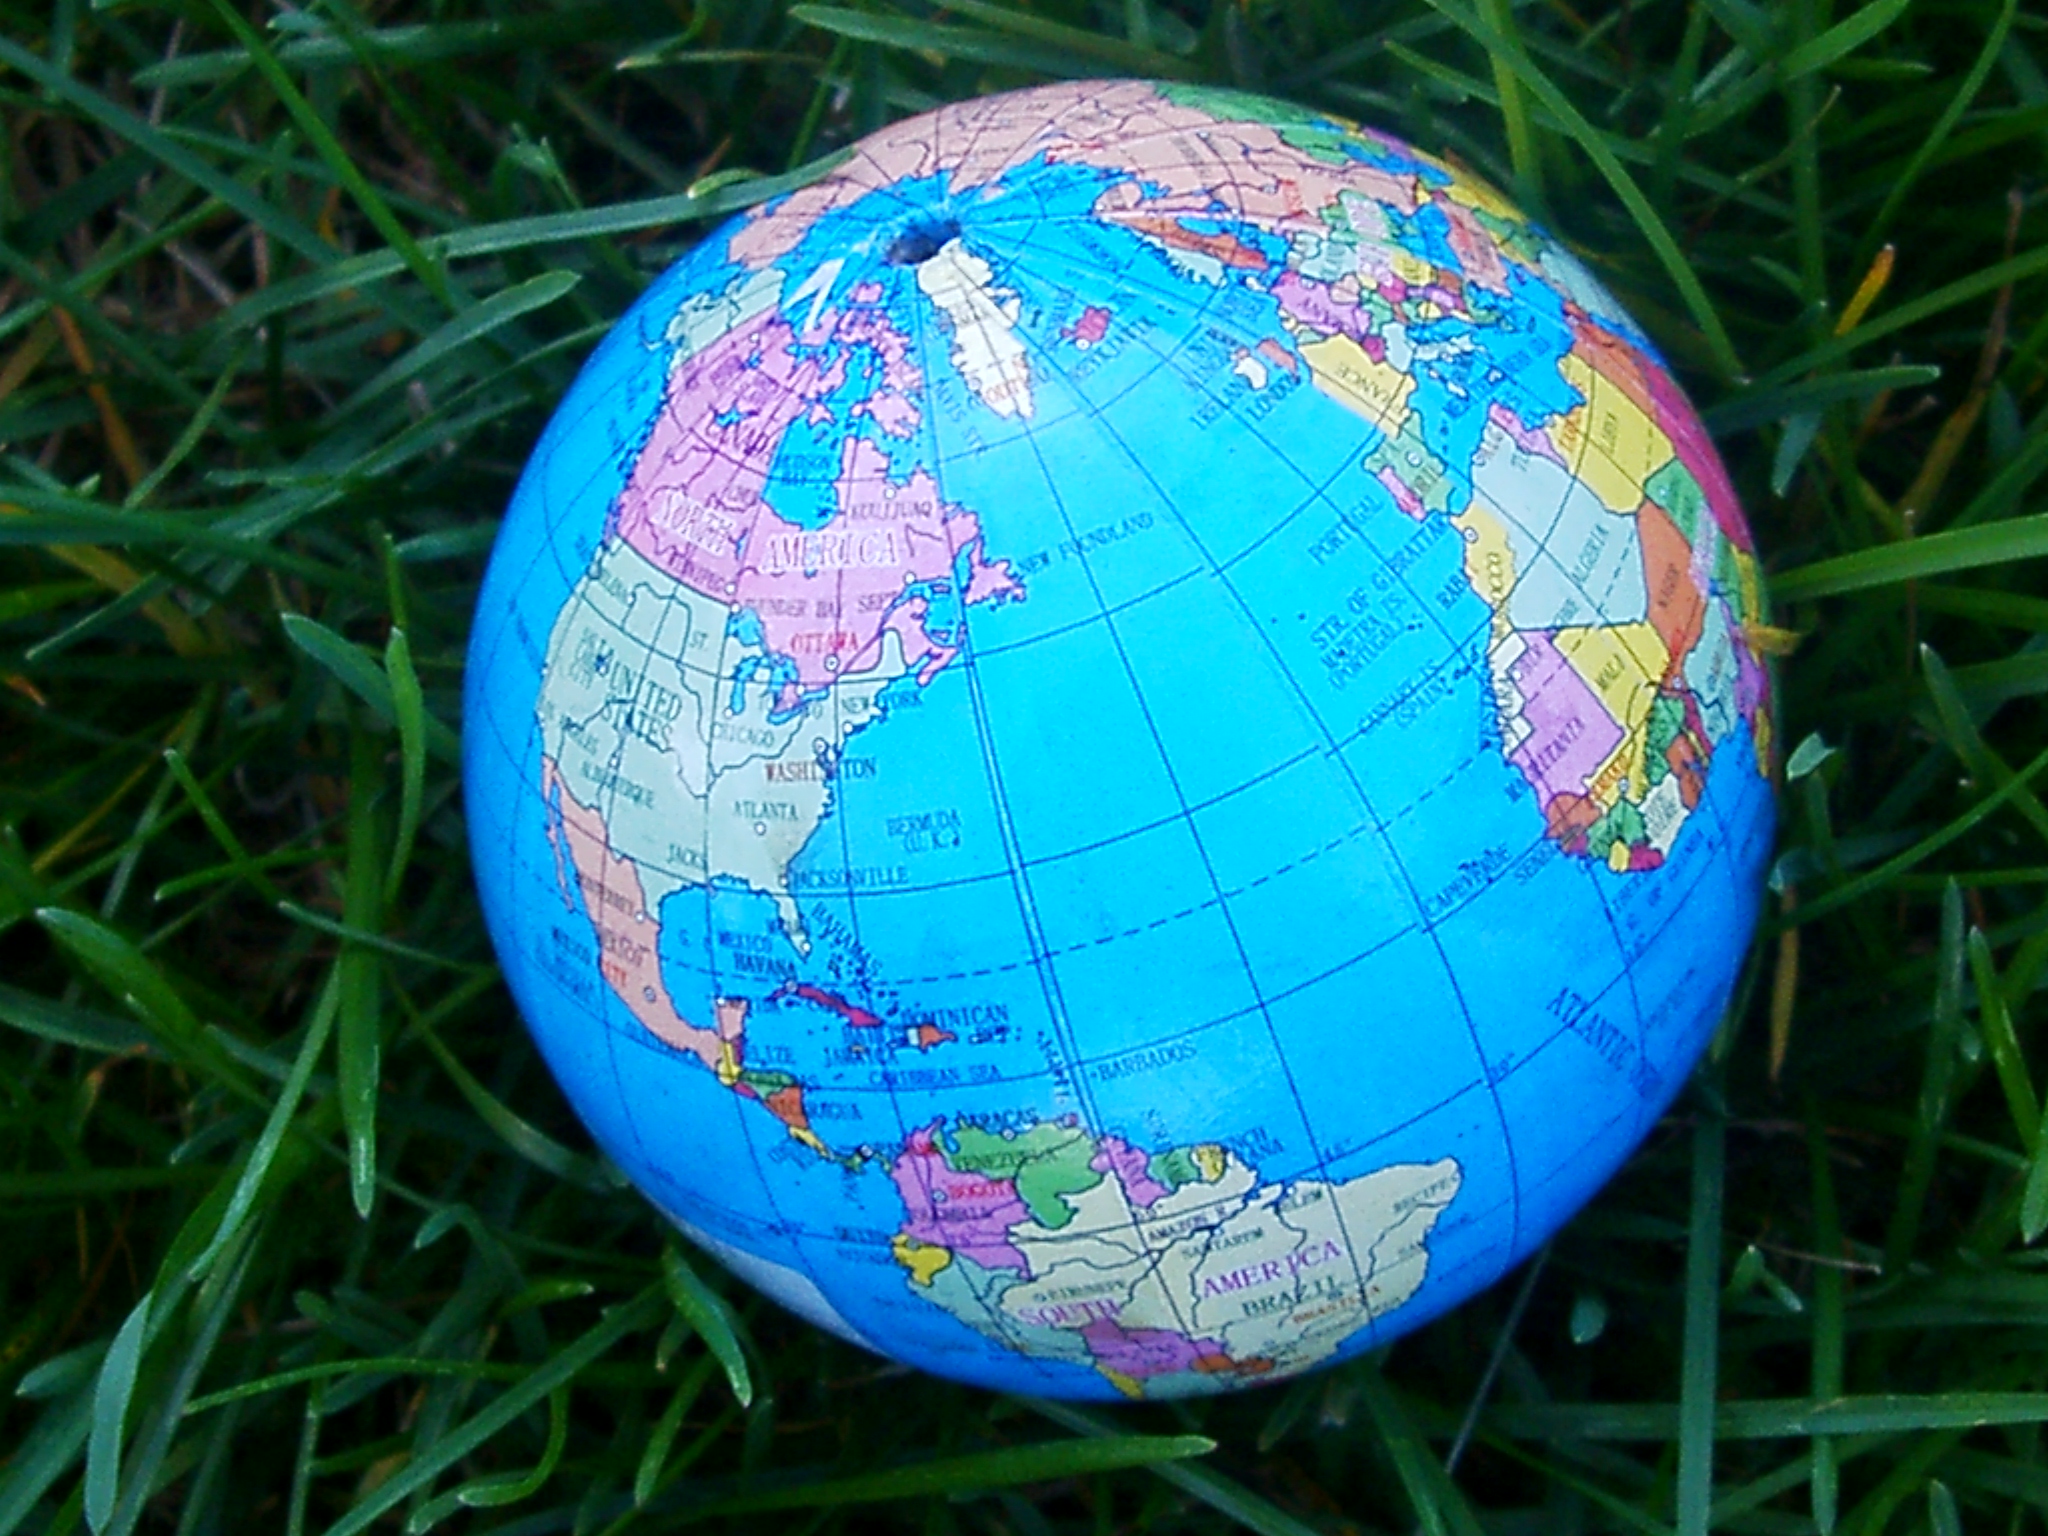 Photo of a globe sitting in the grass.